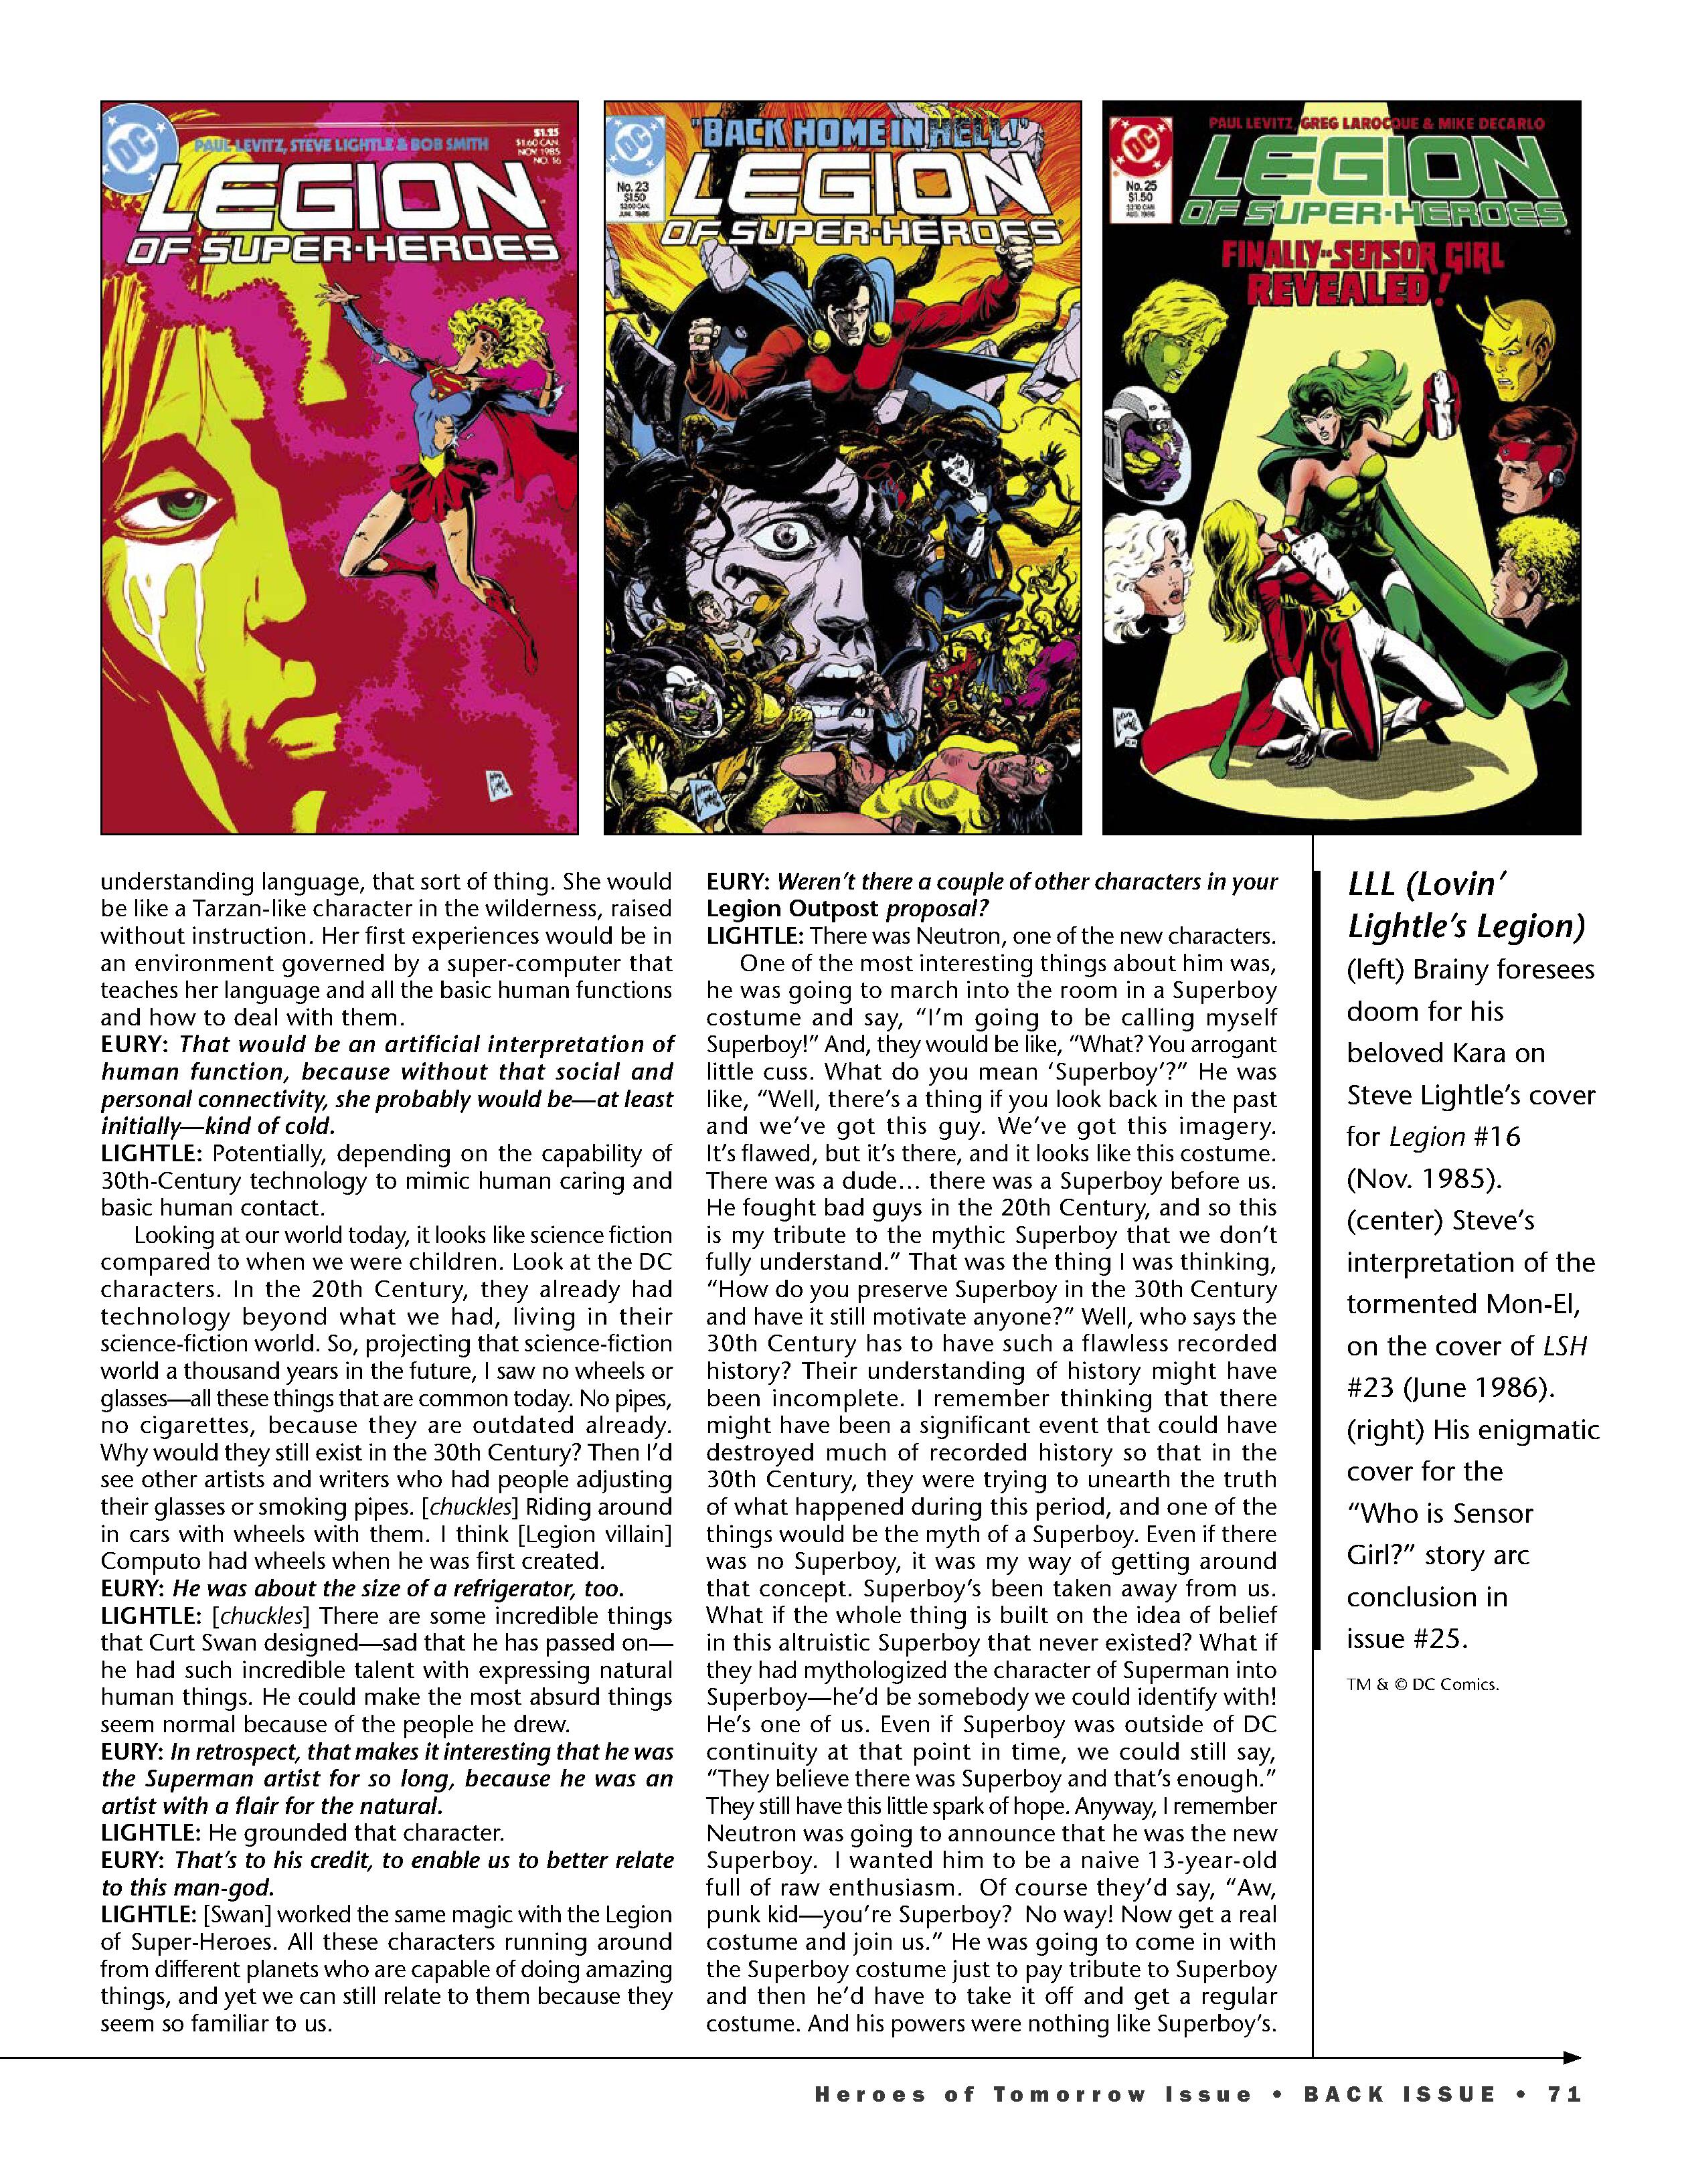 Read online Back Issue comic -  Issue #120 - 73